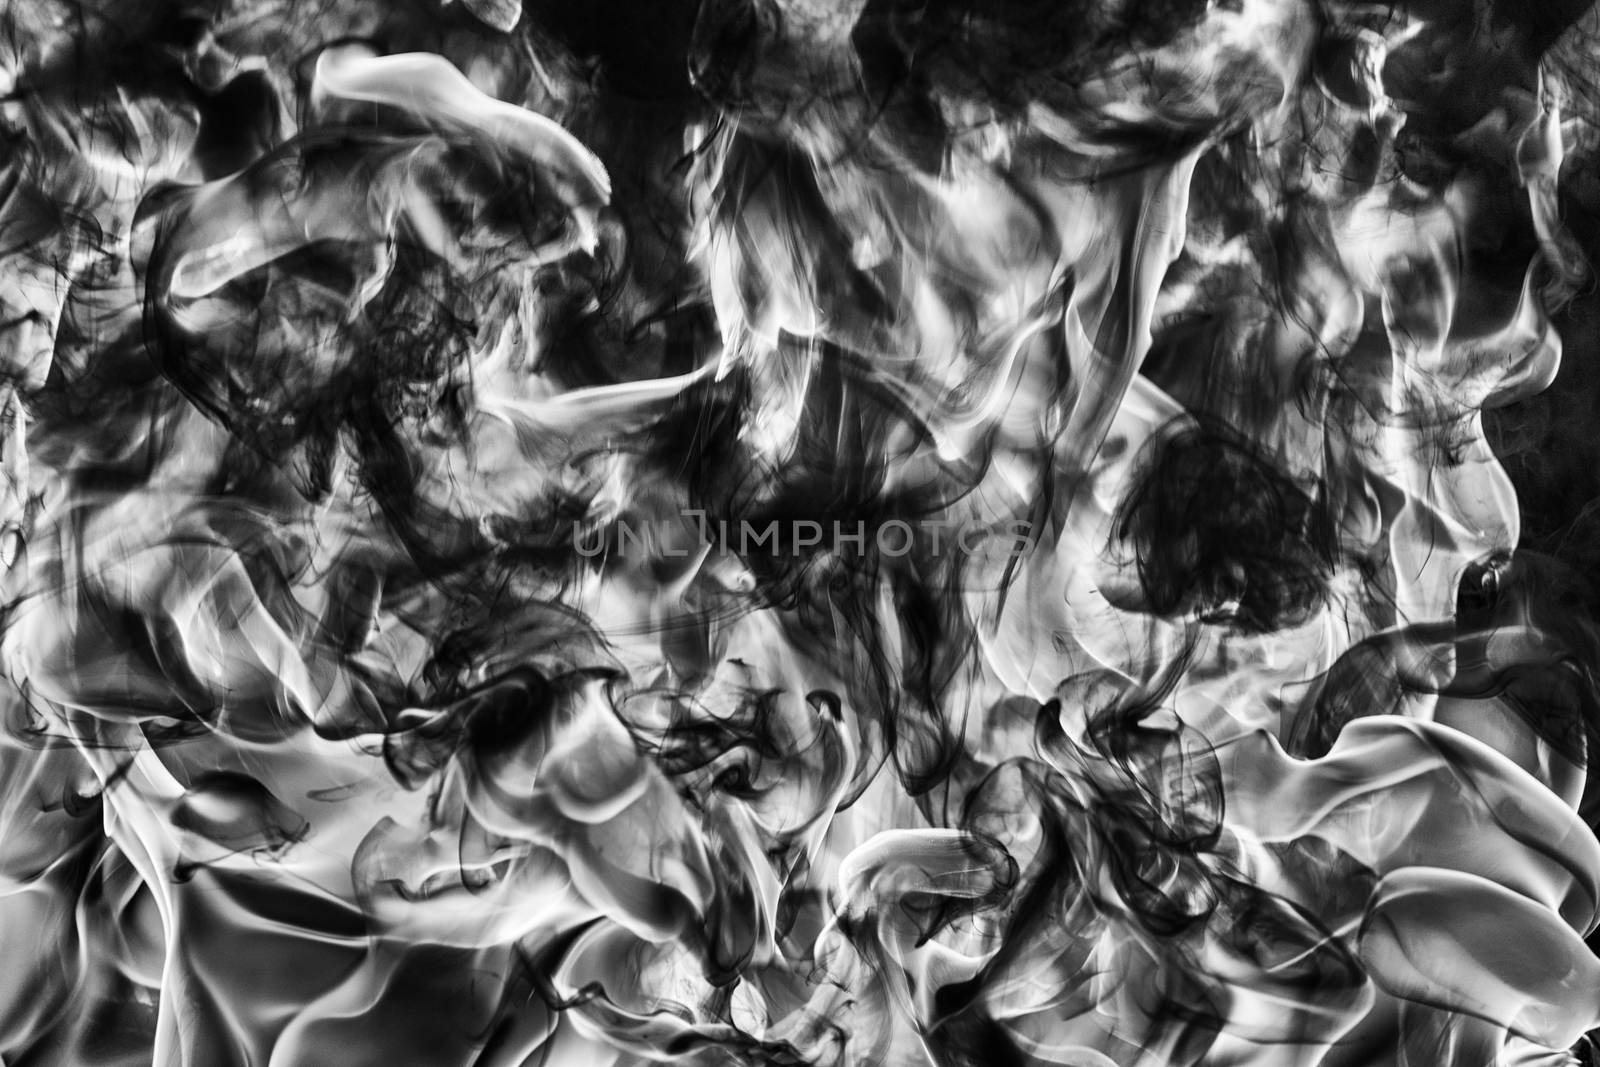 Abstract puffs of natural black smoke and white huge flame of strong fire. Black and white photography, motion blur from fire, high temperature from flames. Dangerous firestorm abstract background.